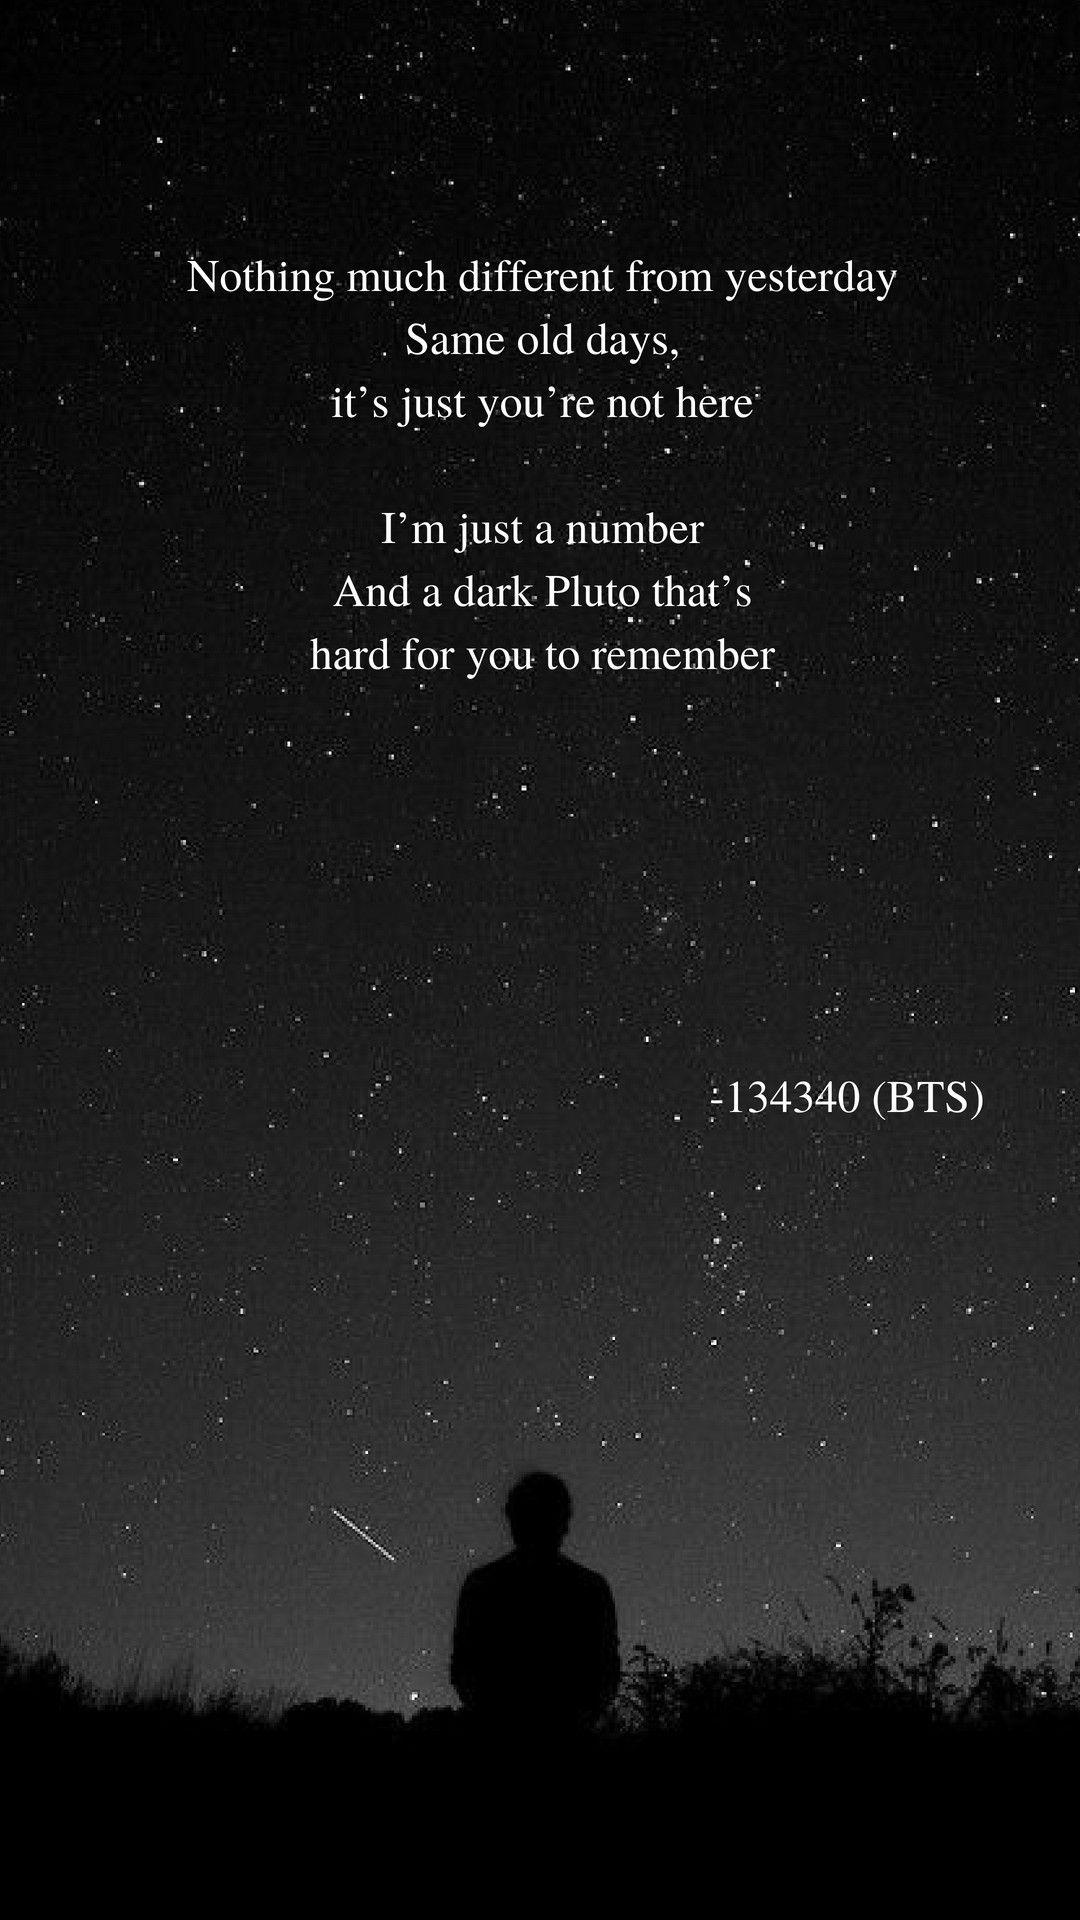  BTS  Songs Wallpapers  Wallpaper  Cave